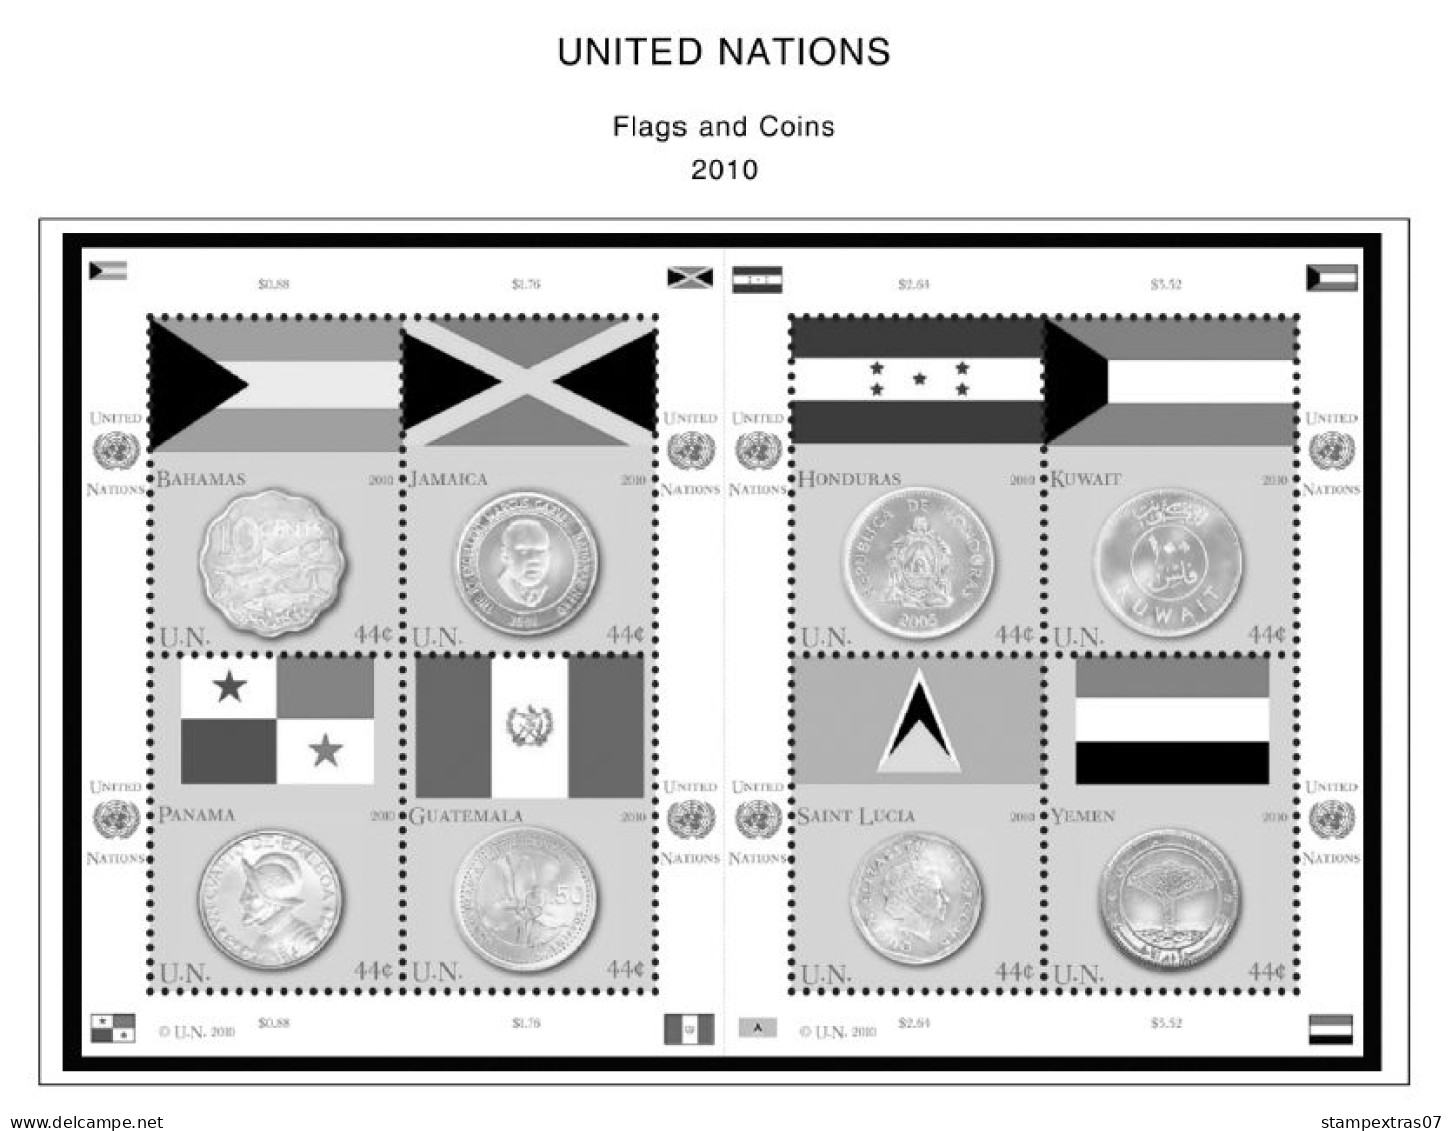 UNITED NATIONS - NEW YORK 1951-2020 STAMP ALBUM PAGES (229 b&w illustrated pages)